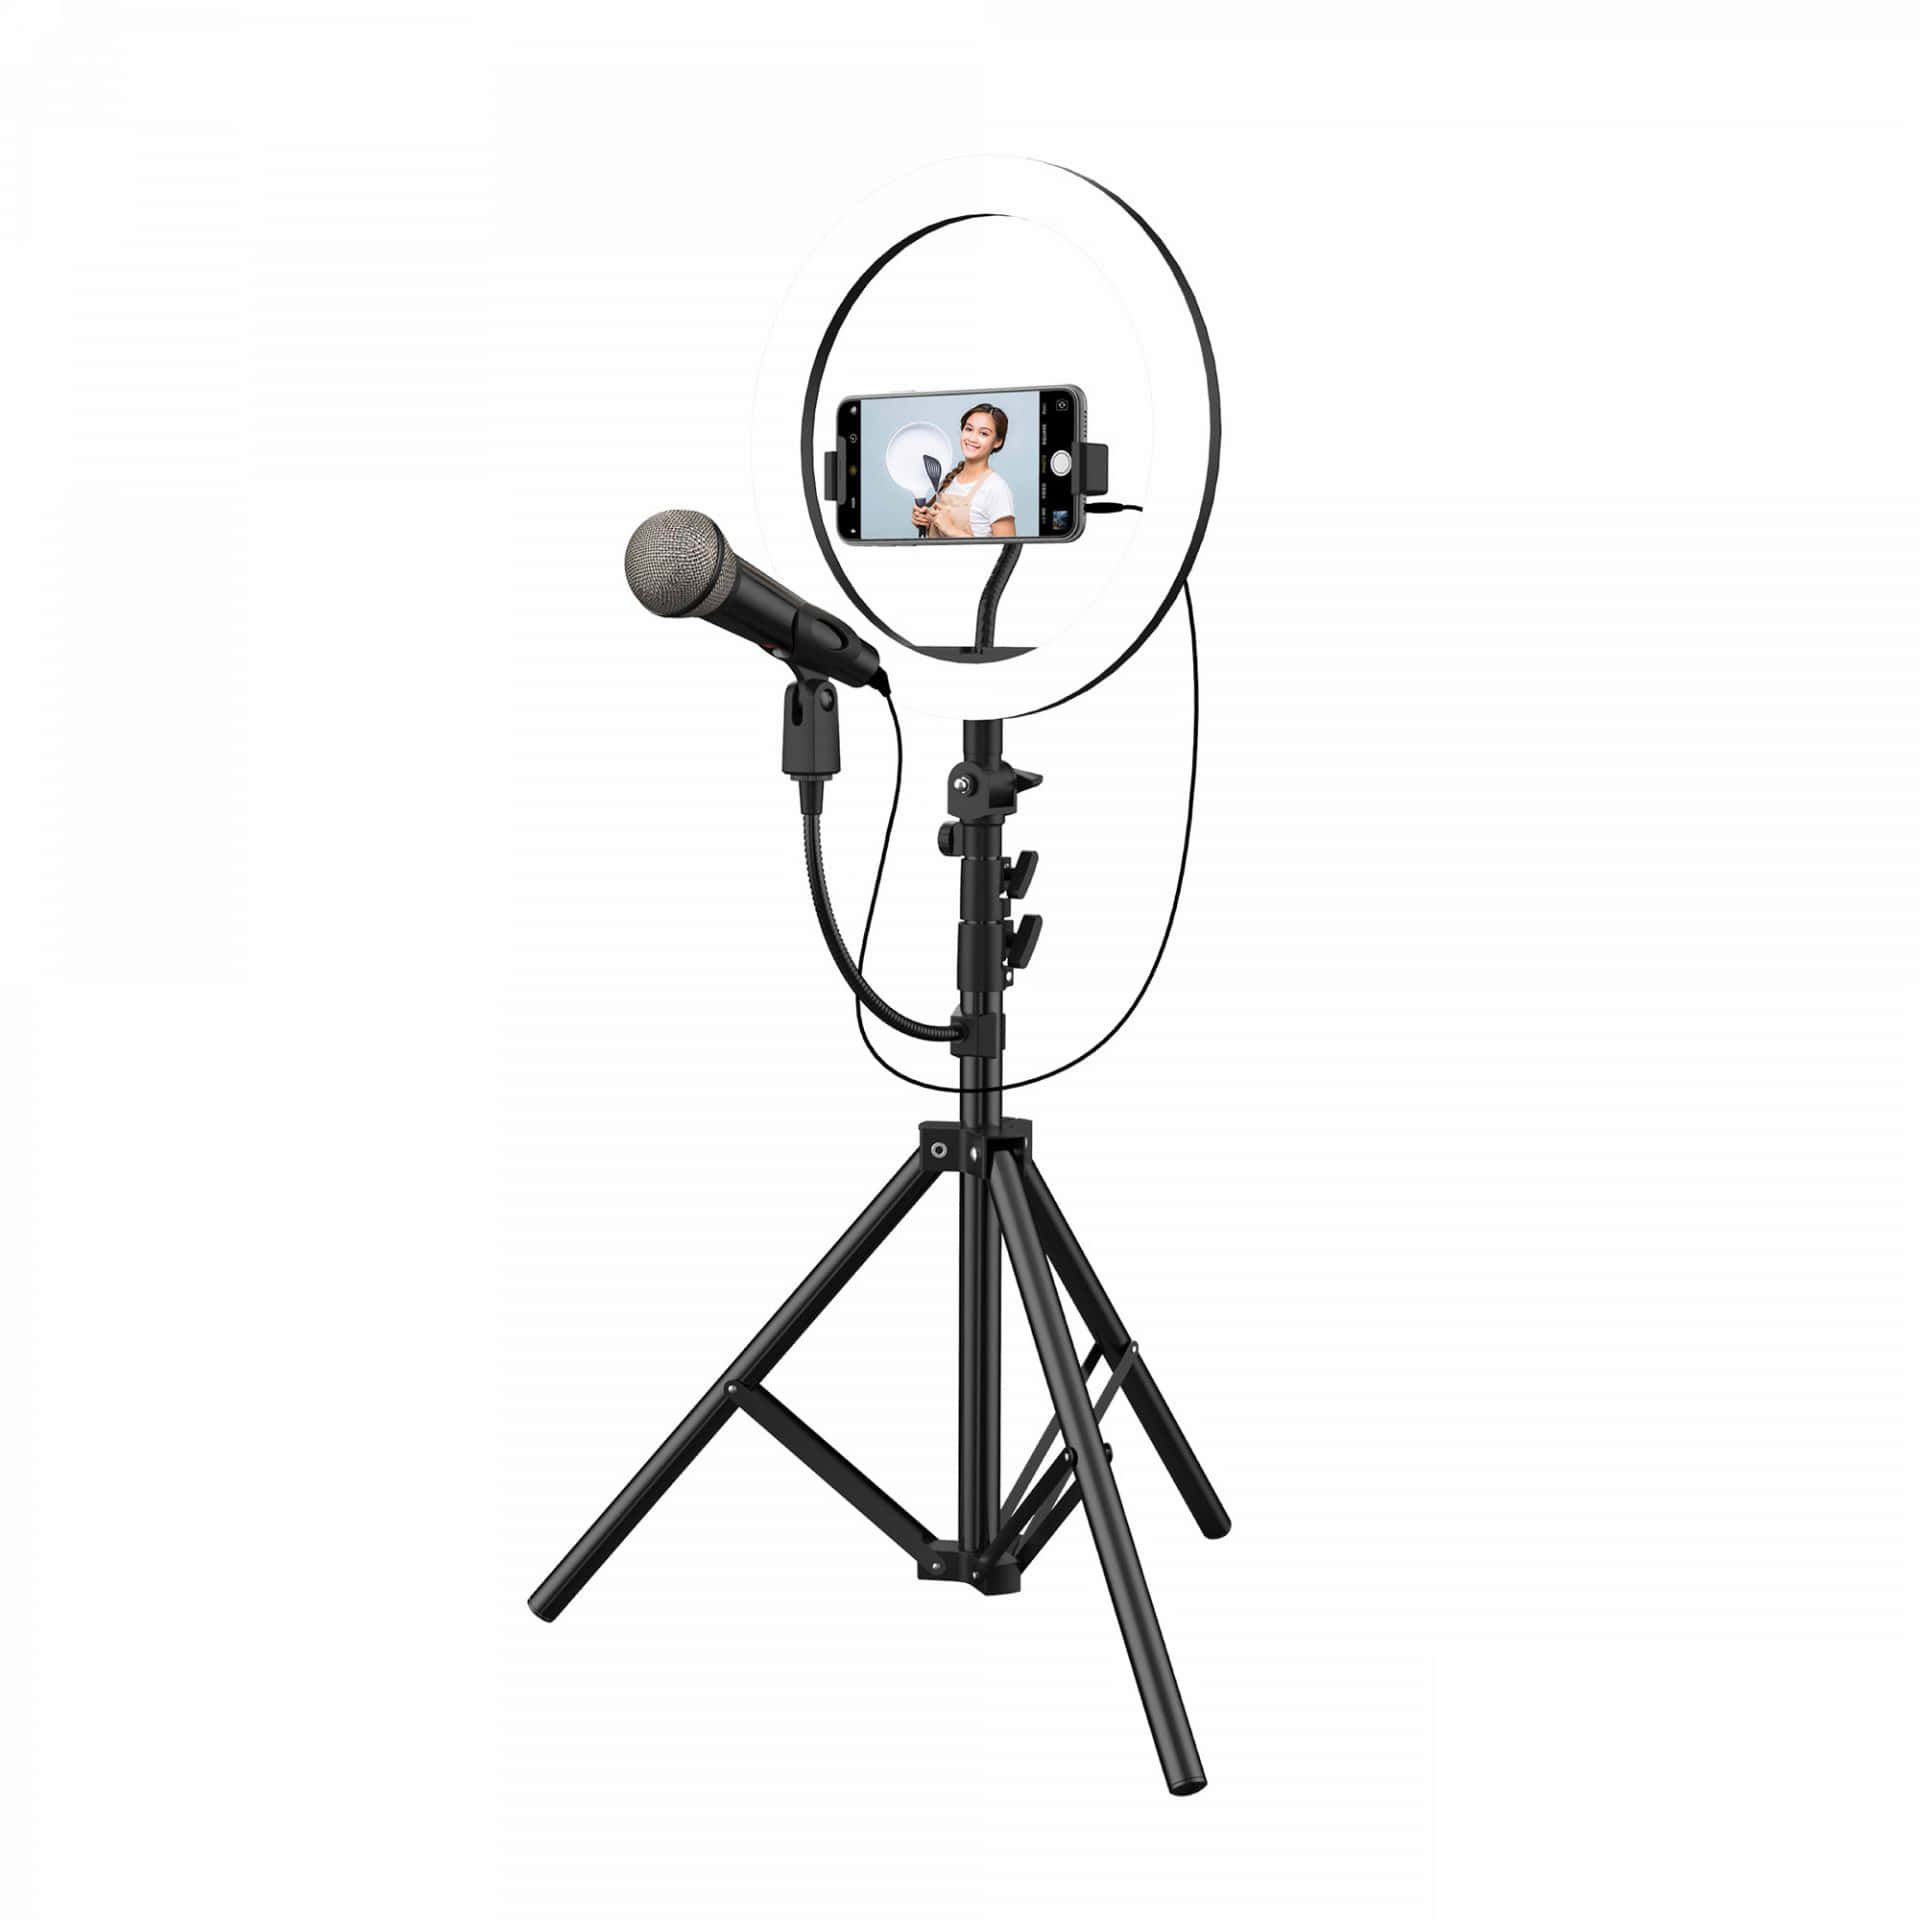 A Microphone On A Tripod With A Phone On It